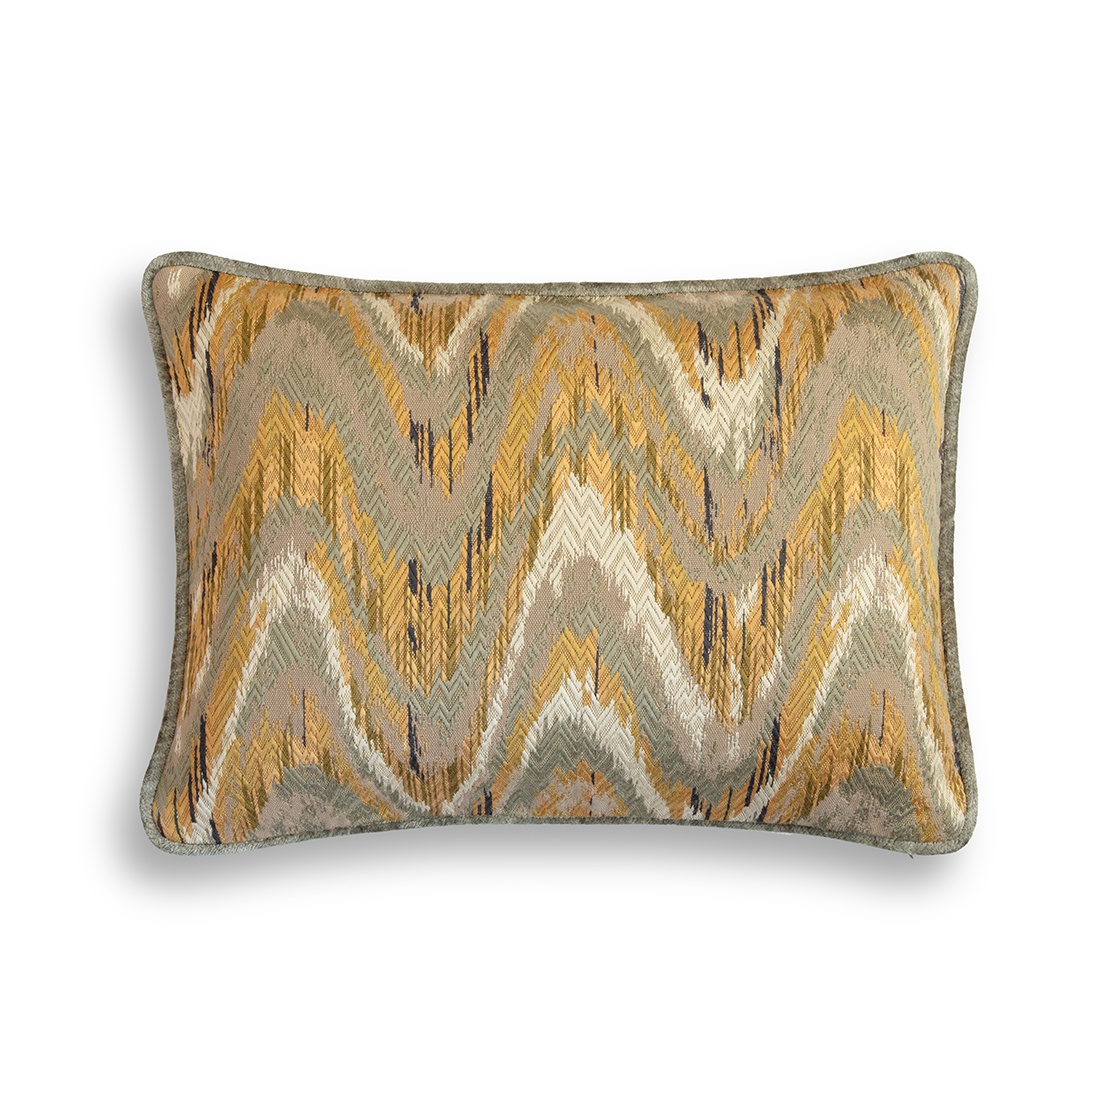 Kyma cushion - Heritage backed and piped in Como silk velvet - Moss - Beaumont & Fletcher